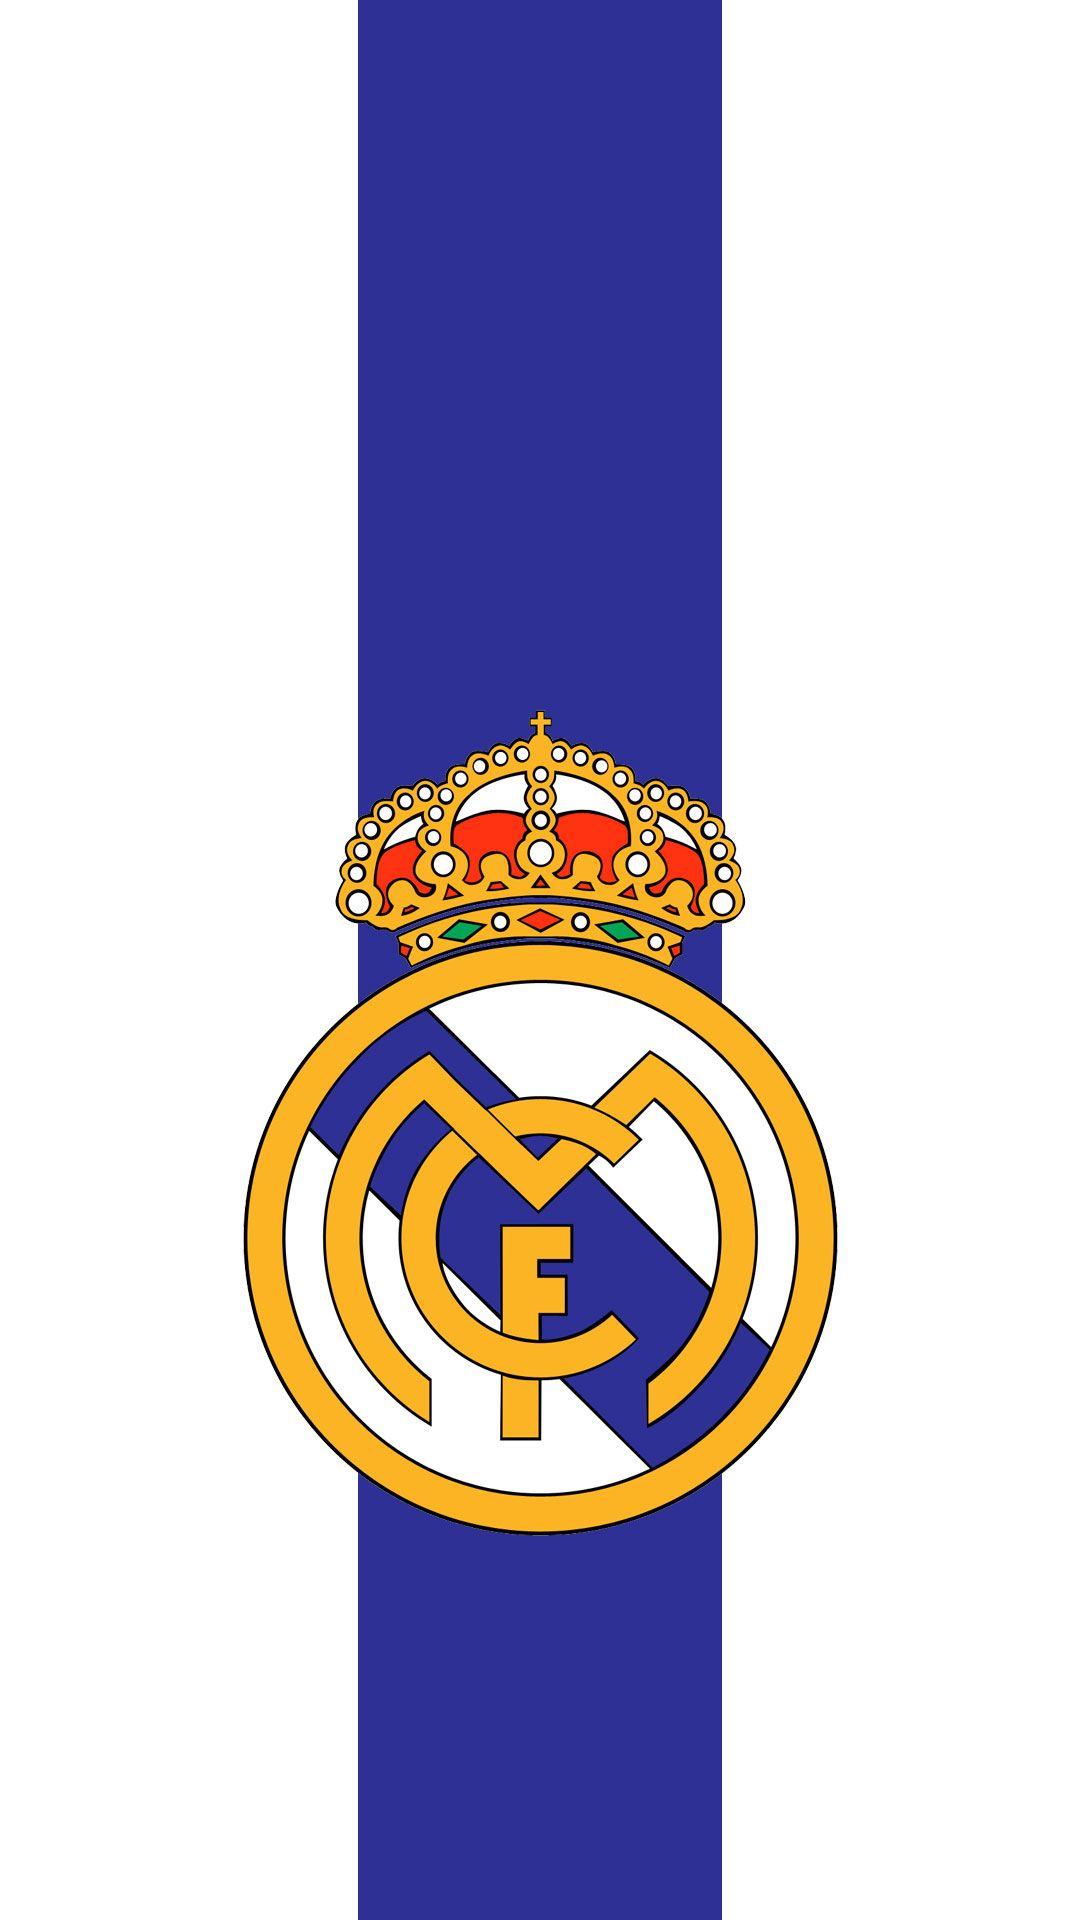 Real Madrid for Android. Real madrid wallpaper, Madrid wallpaper